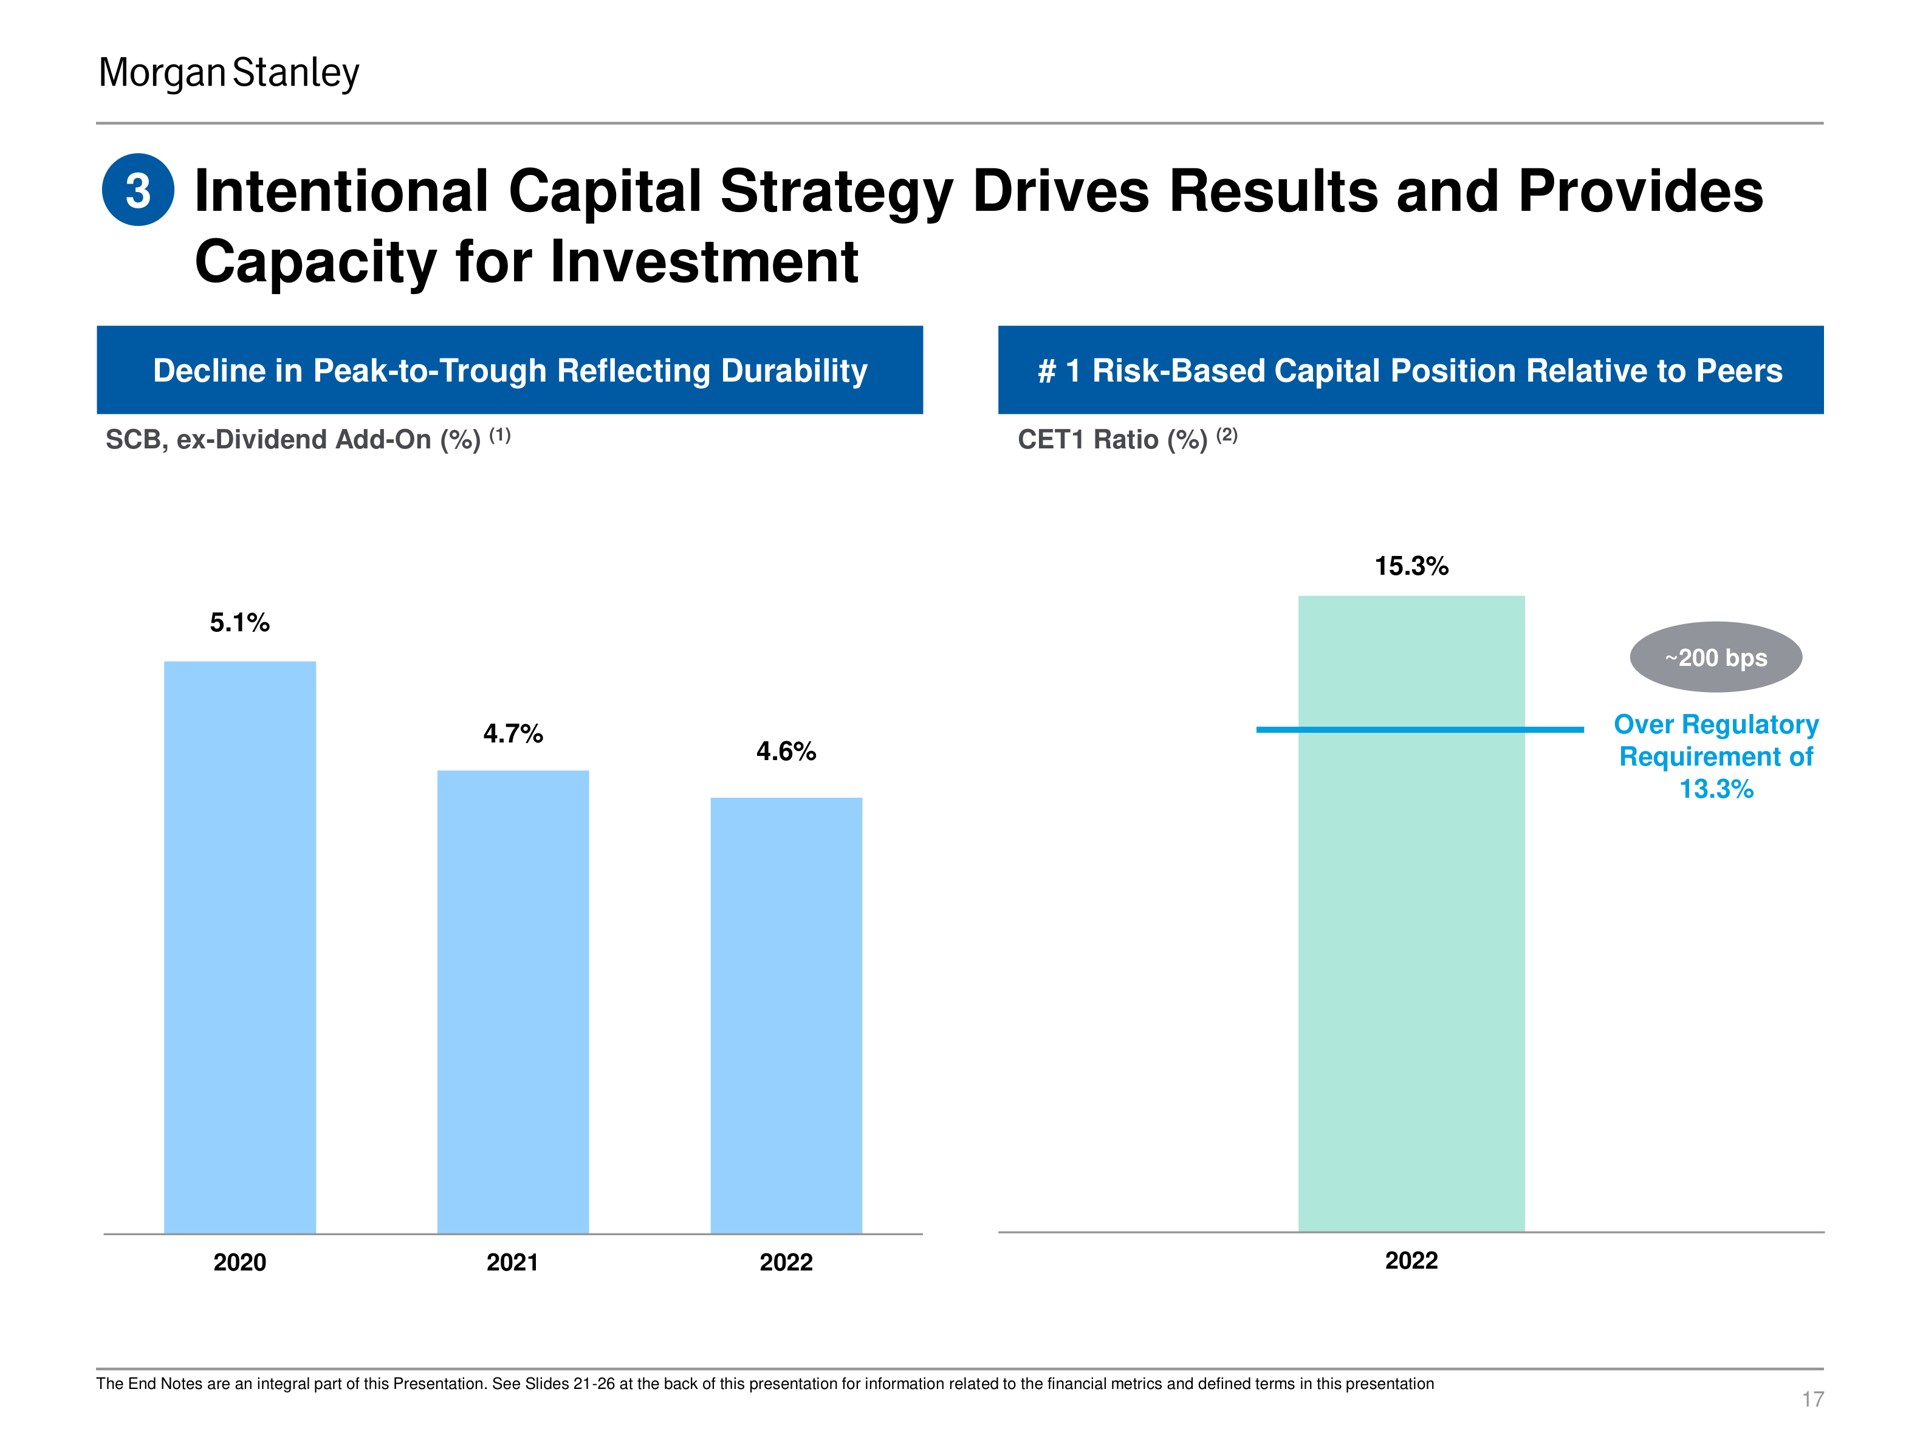 intentional capital strategy drives results and provides capacity for investment | Morgan Stanley